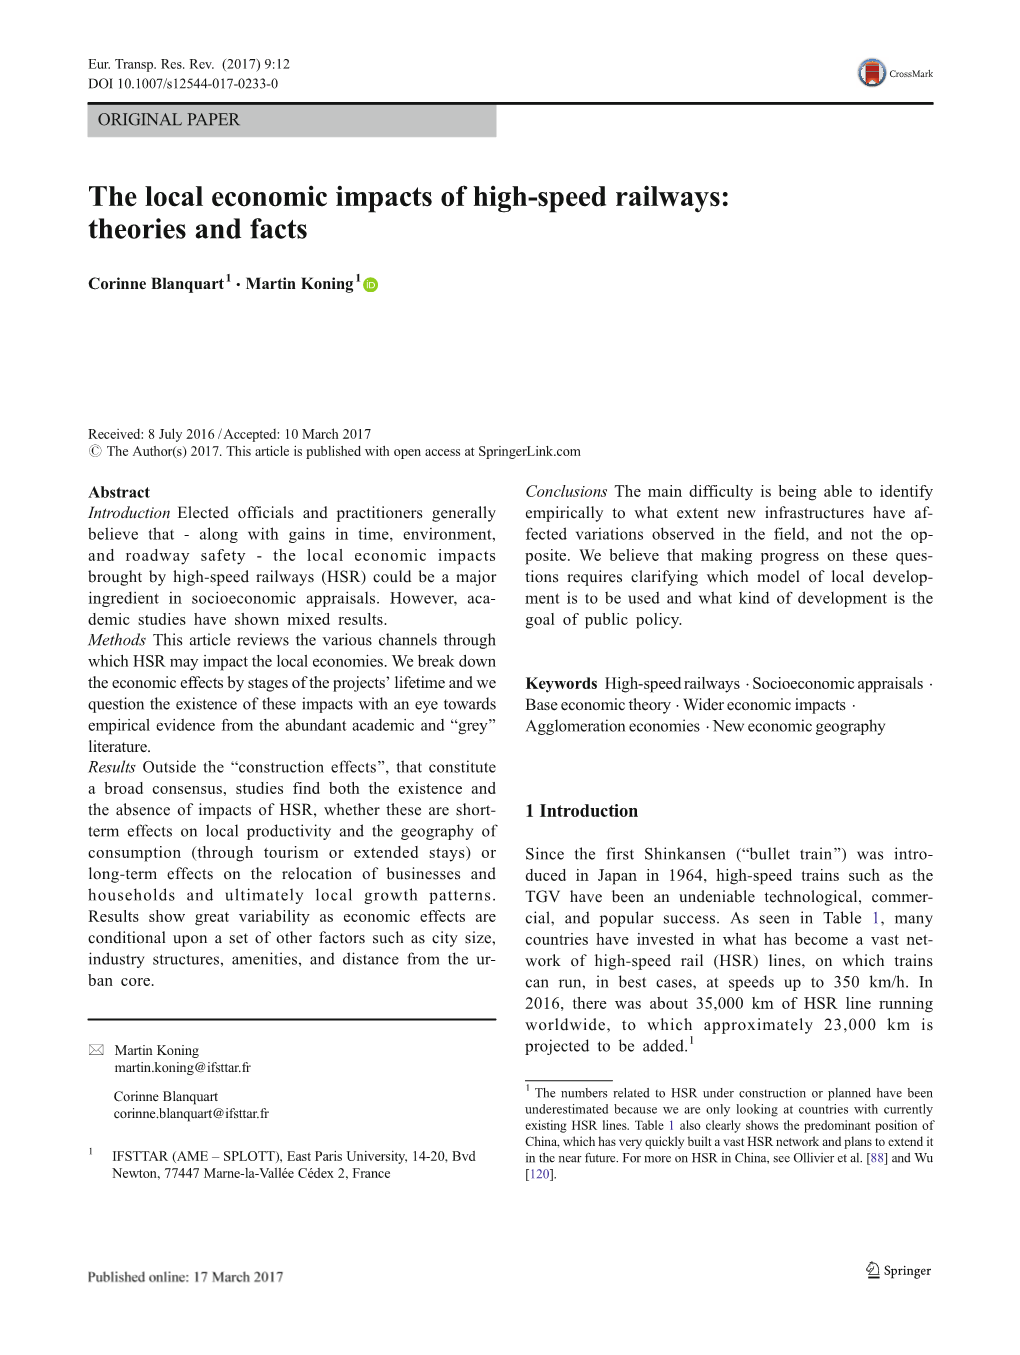 The Local Economic Impacts of High-Speed Railways: Theories and Facts